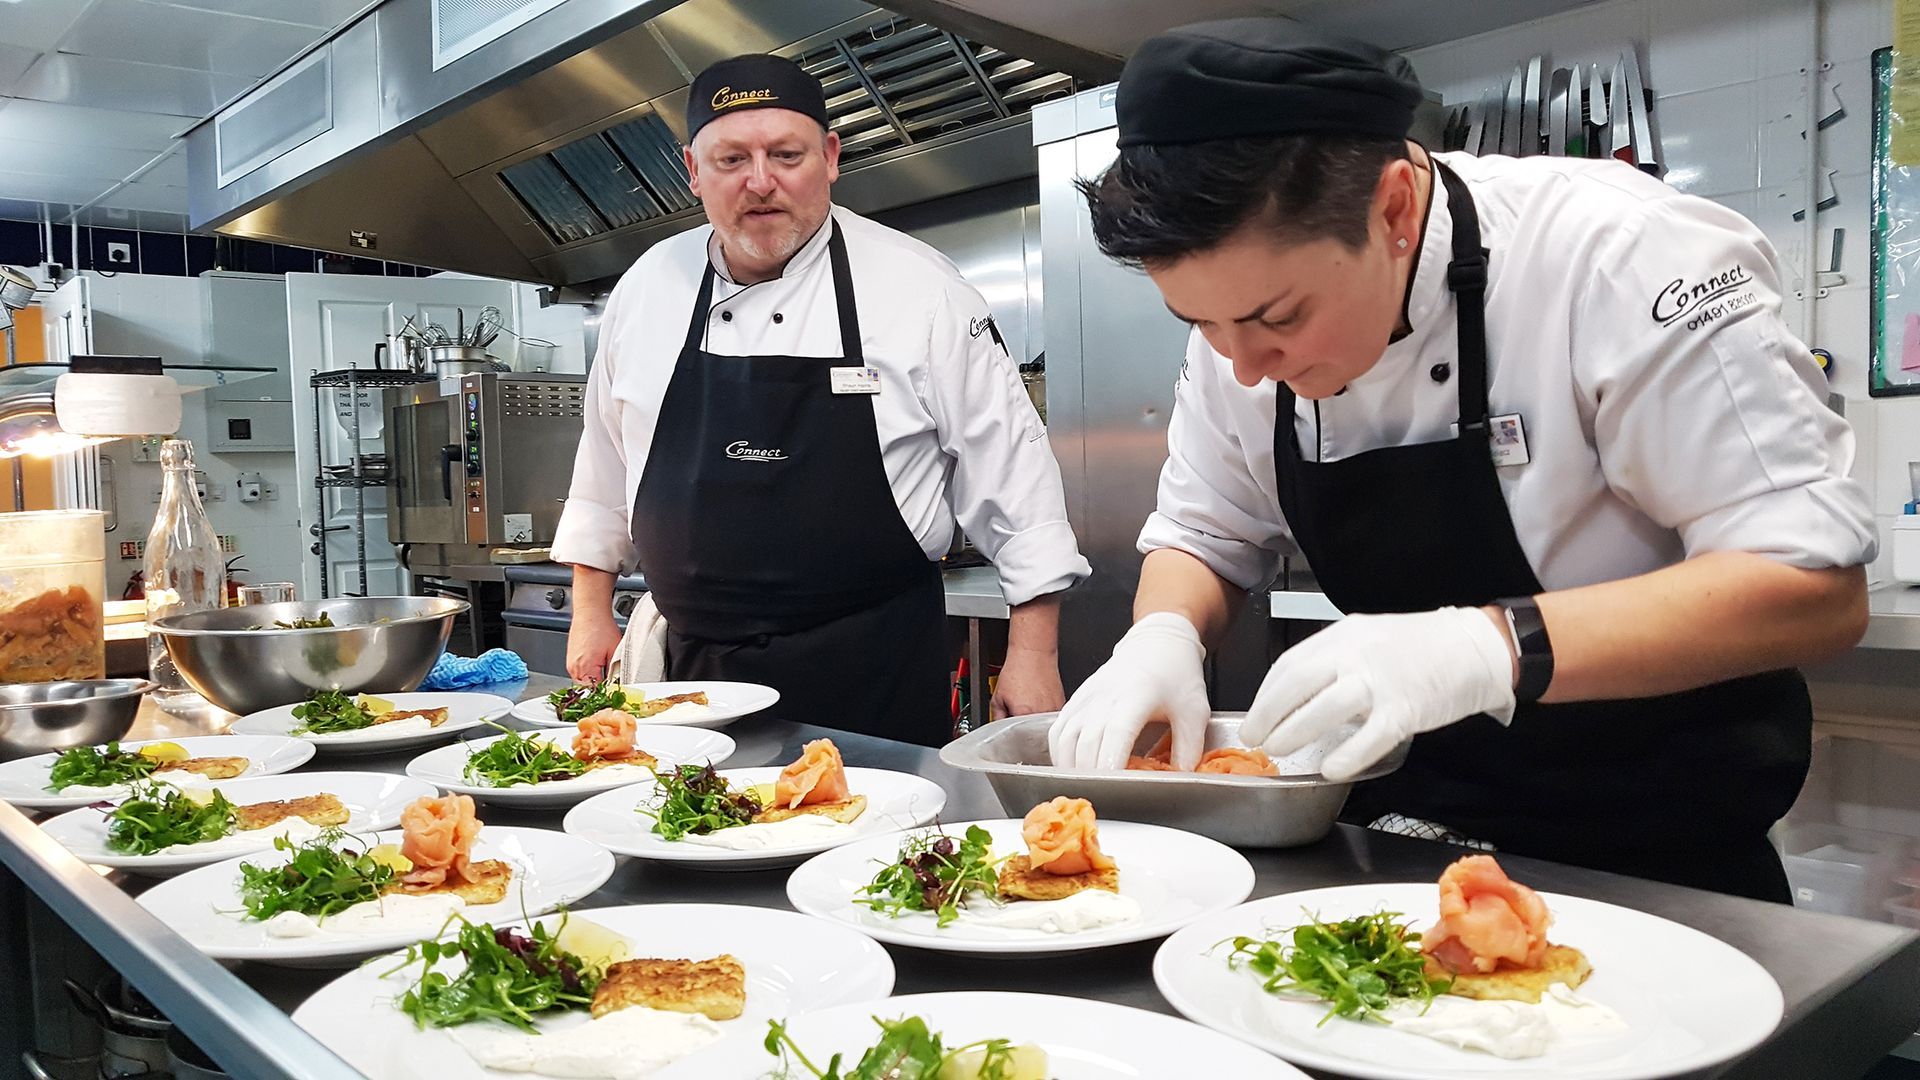 Contract Caterers plating up a fresh food dish